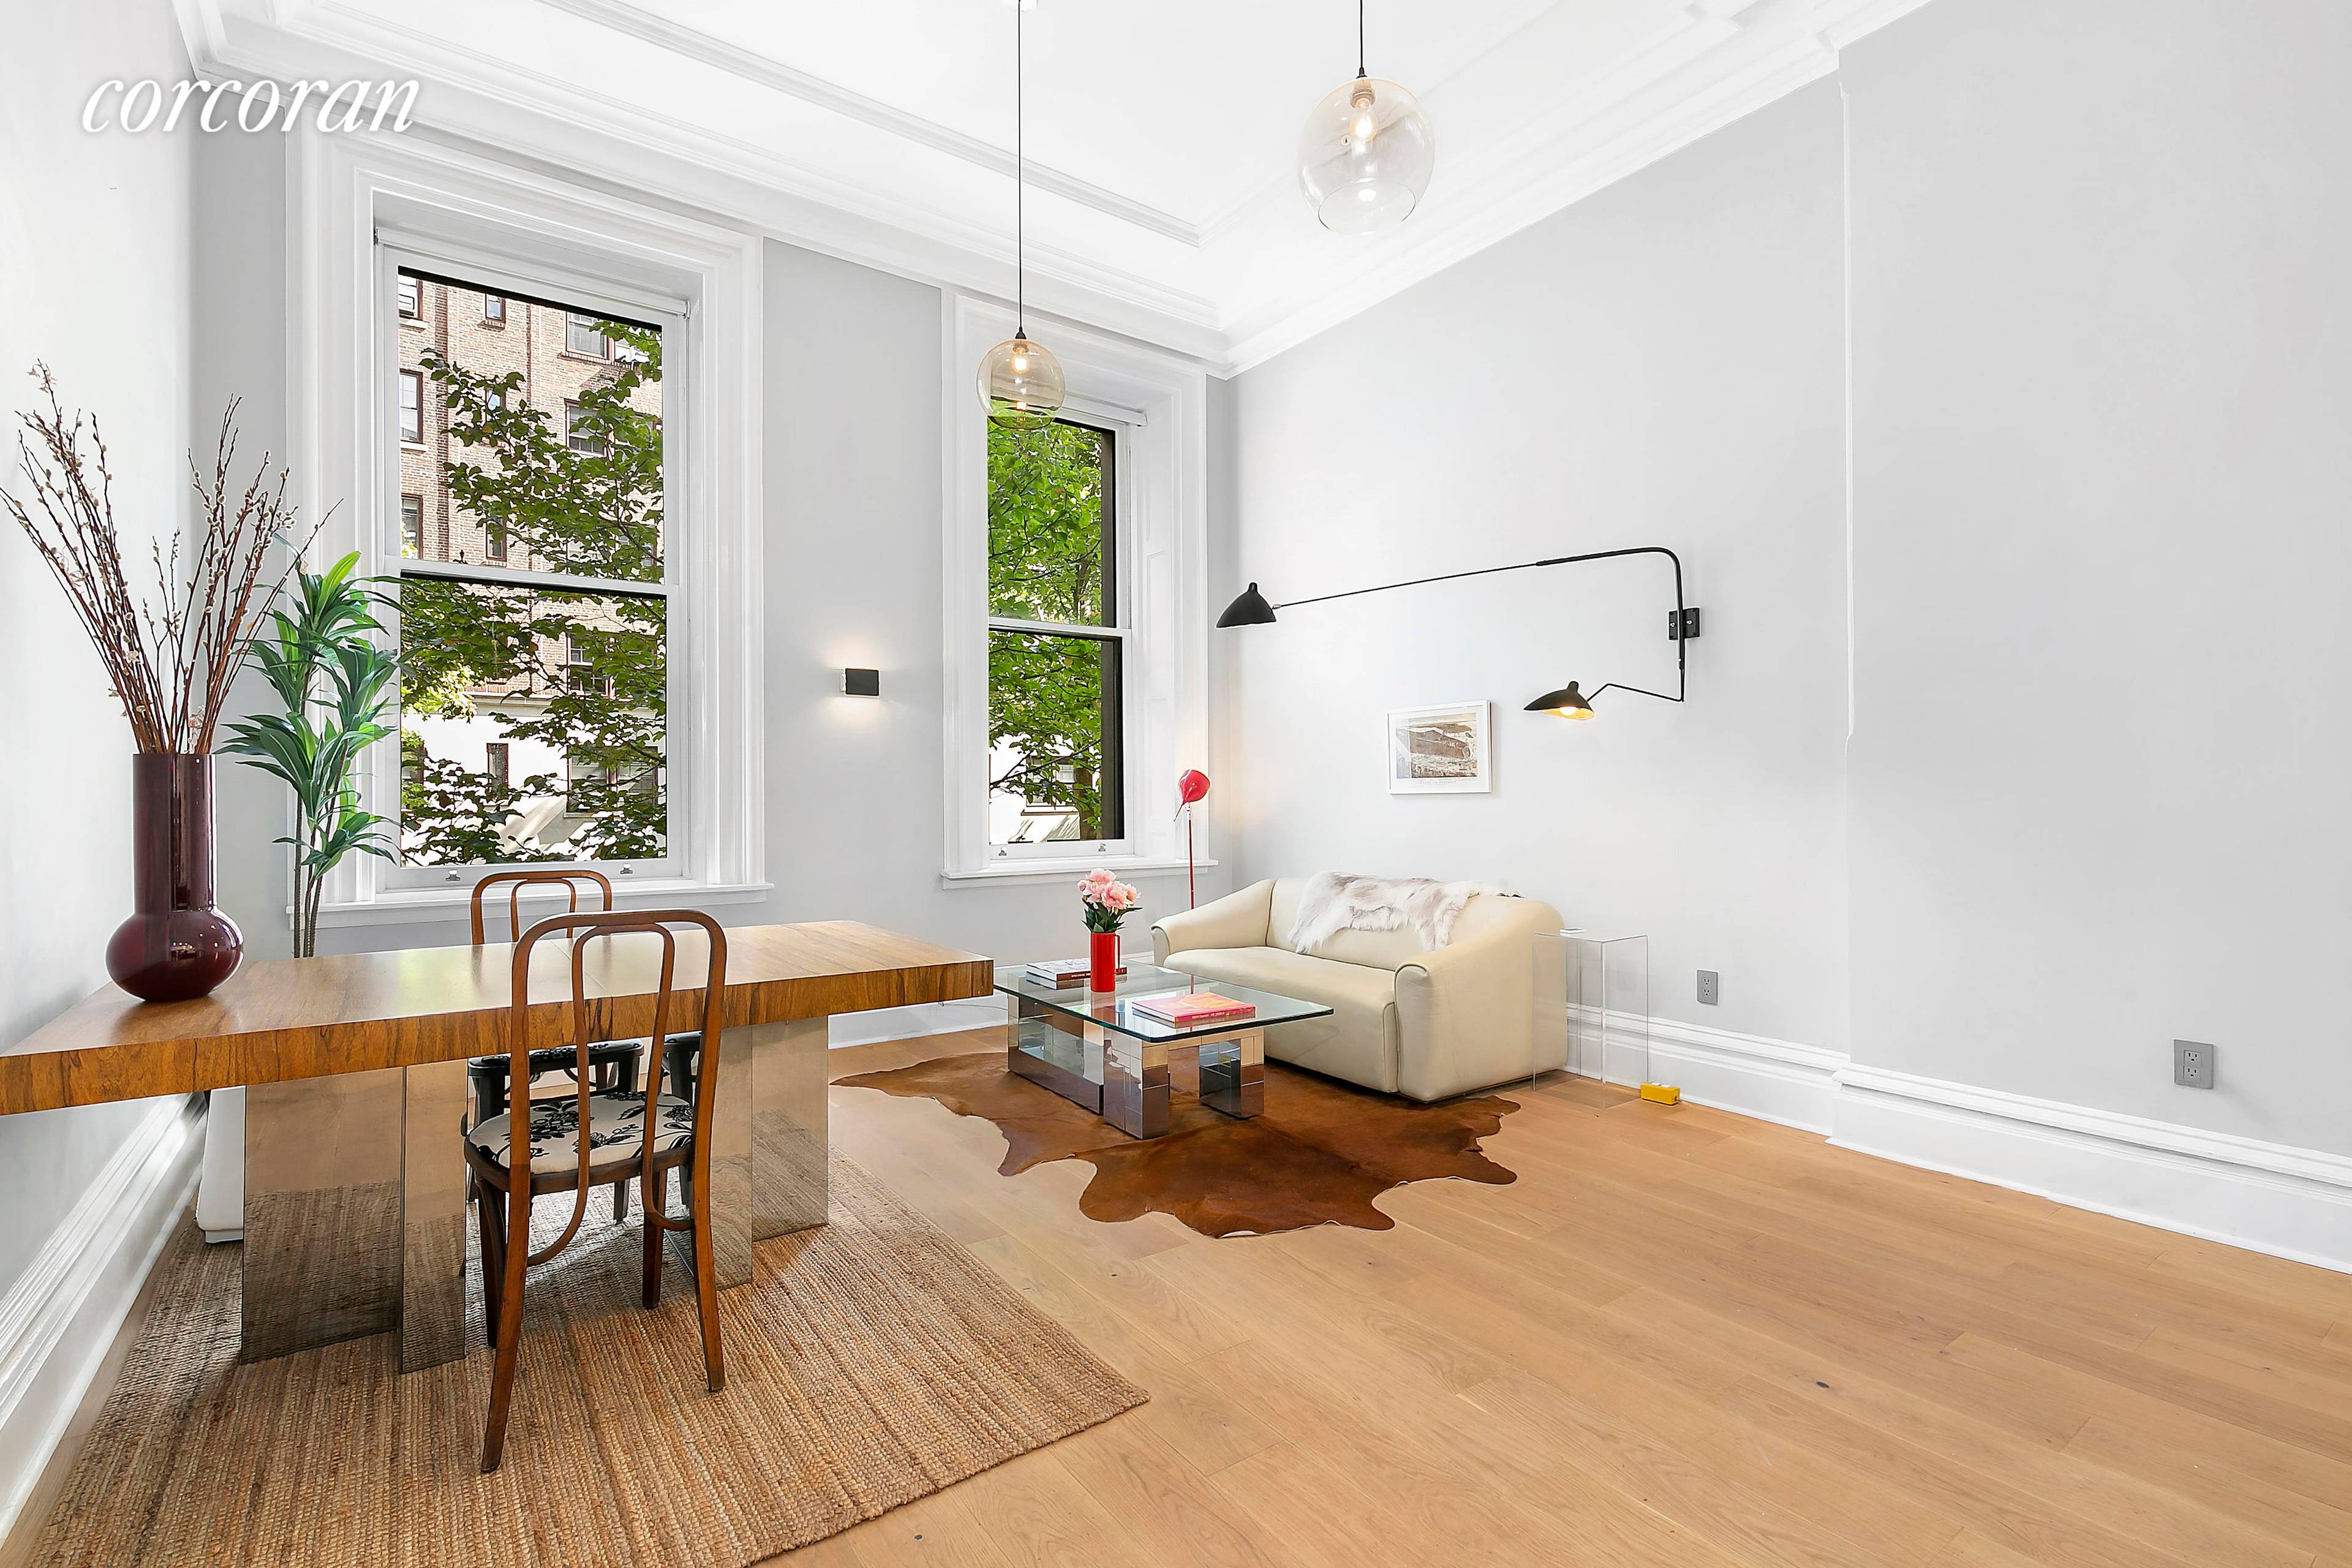 Welcome to 21 Monroe Place apt 2F an incredible opportunity to own a one of a kind Parlor level apartment in a historic Brooklyn Heights brownstone.